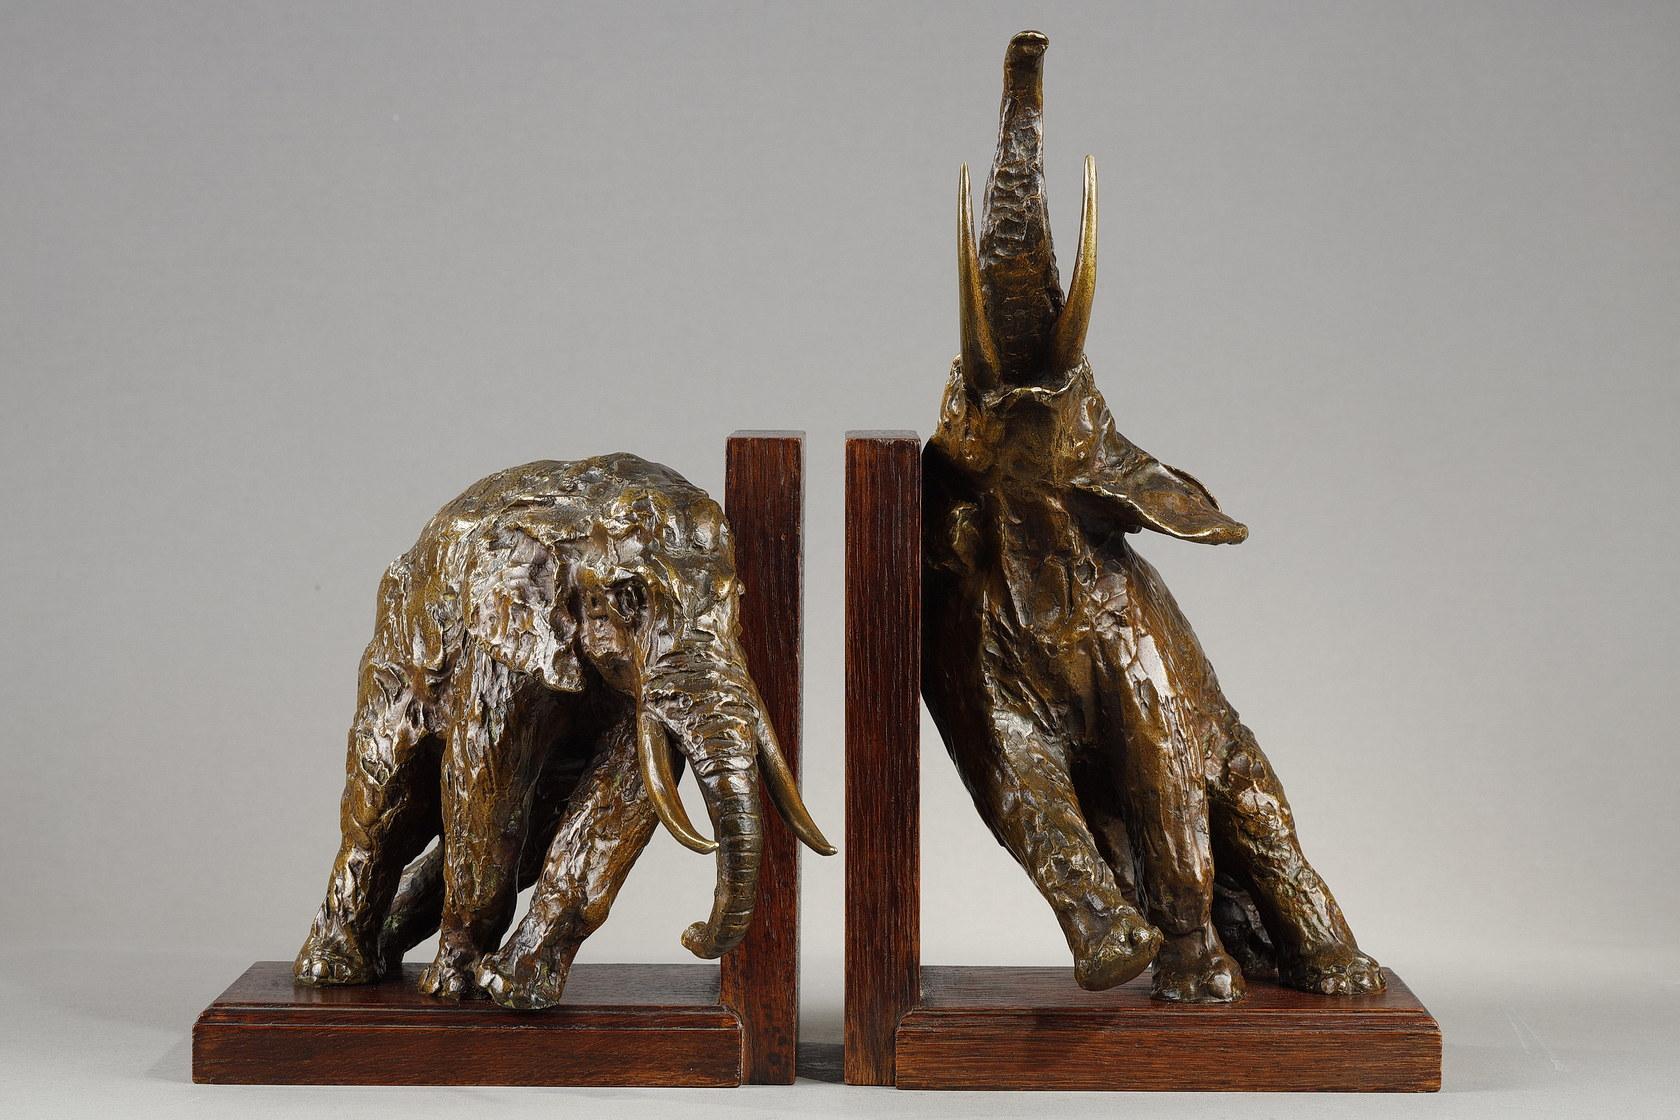 Ary Bitter Figurative Sculpture - Pair of bookends with Elephants